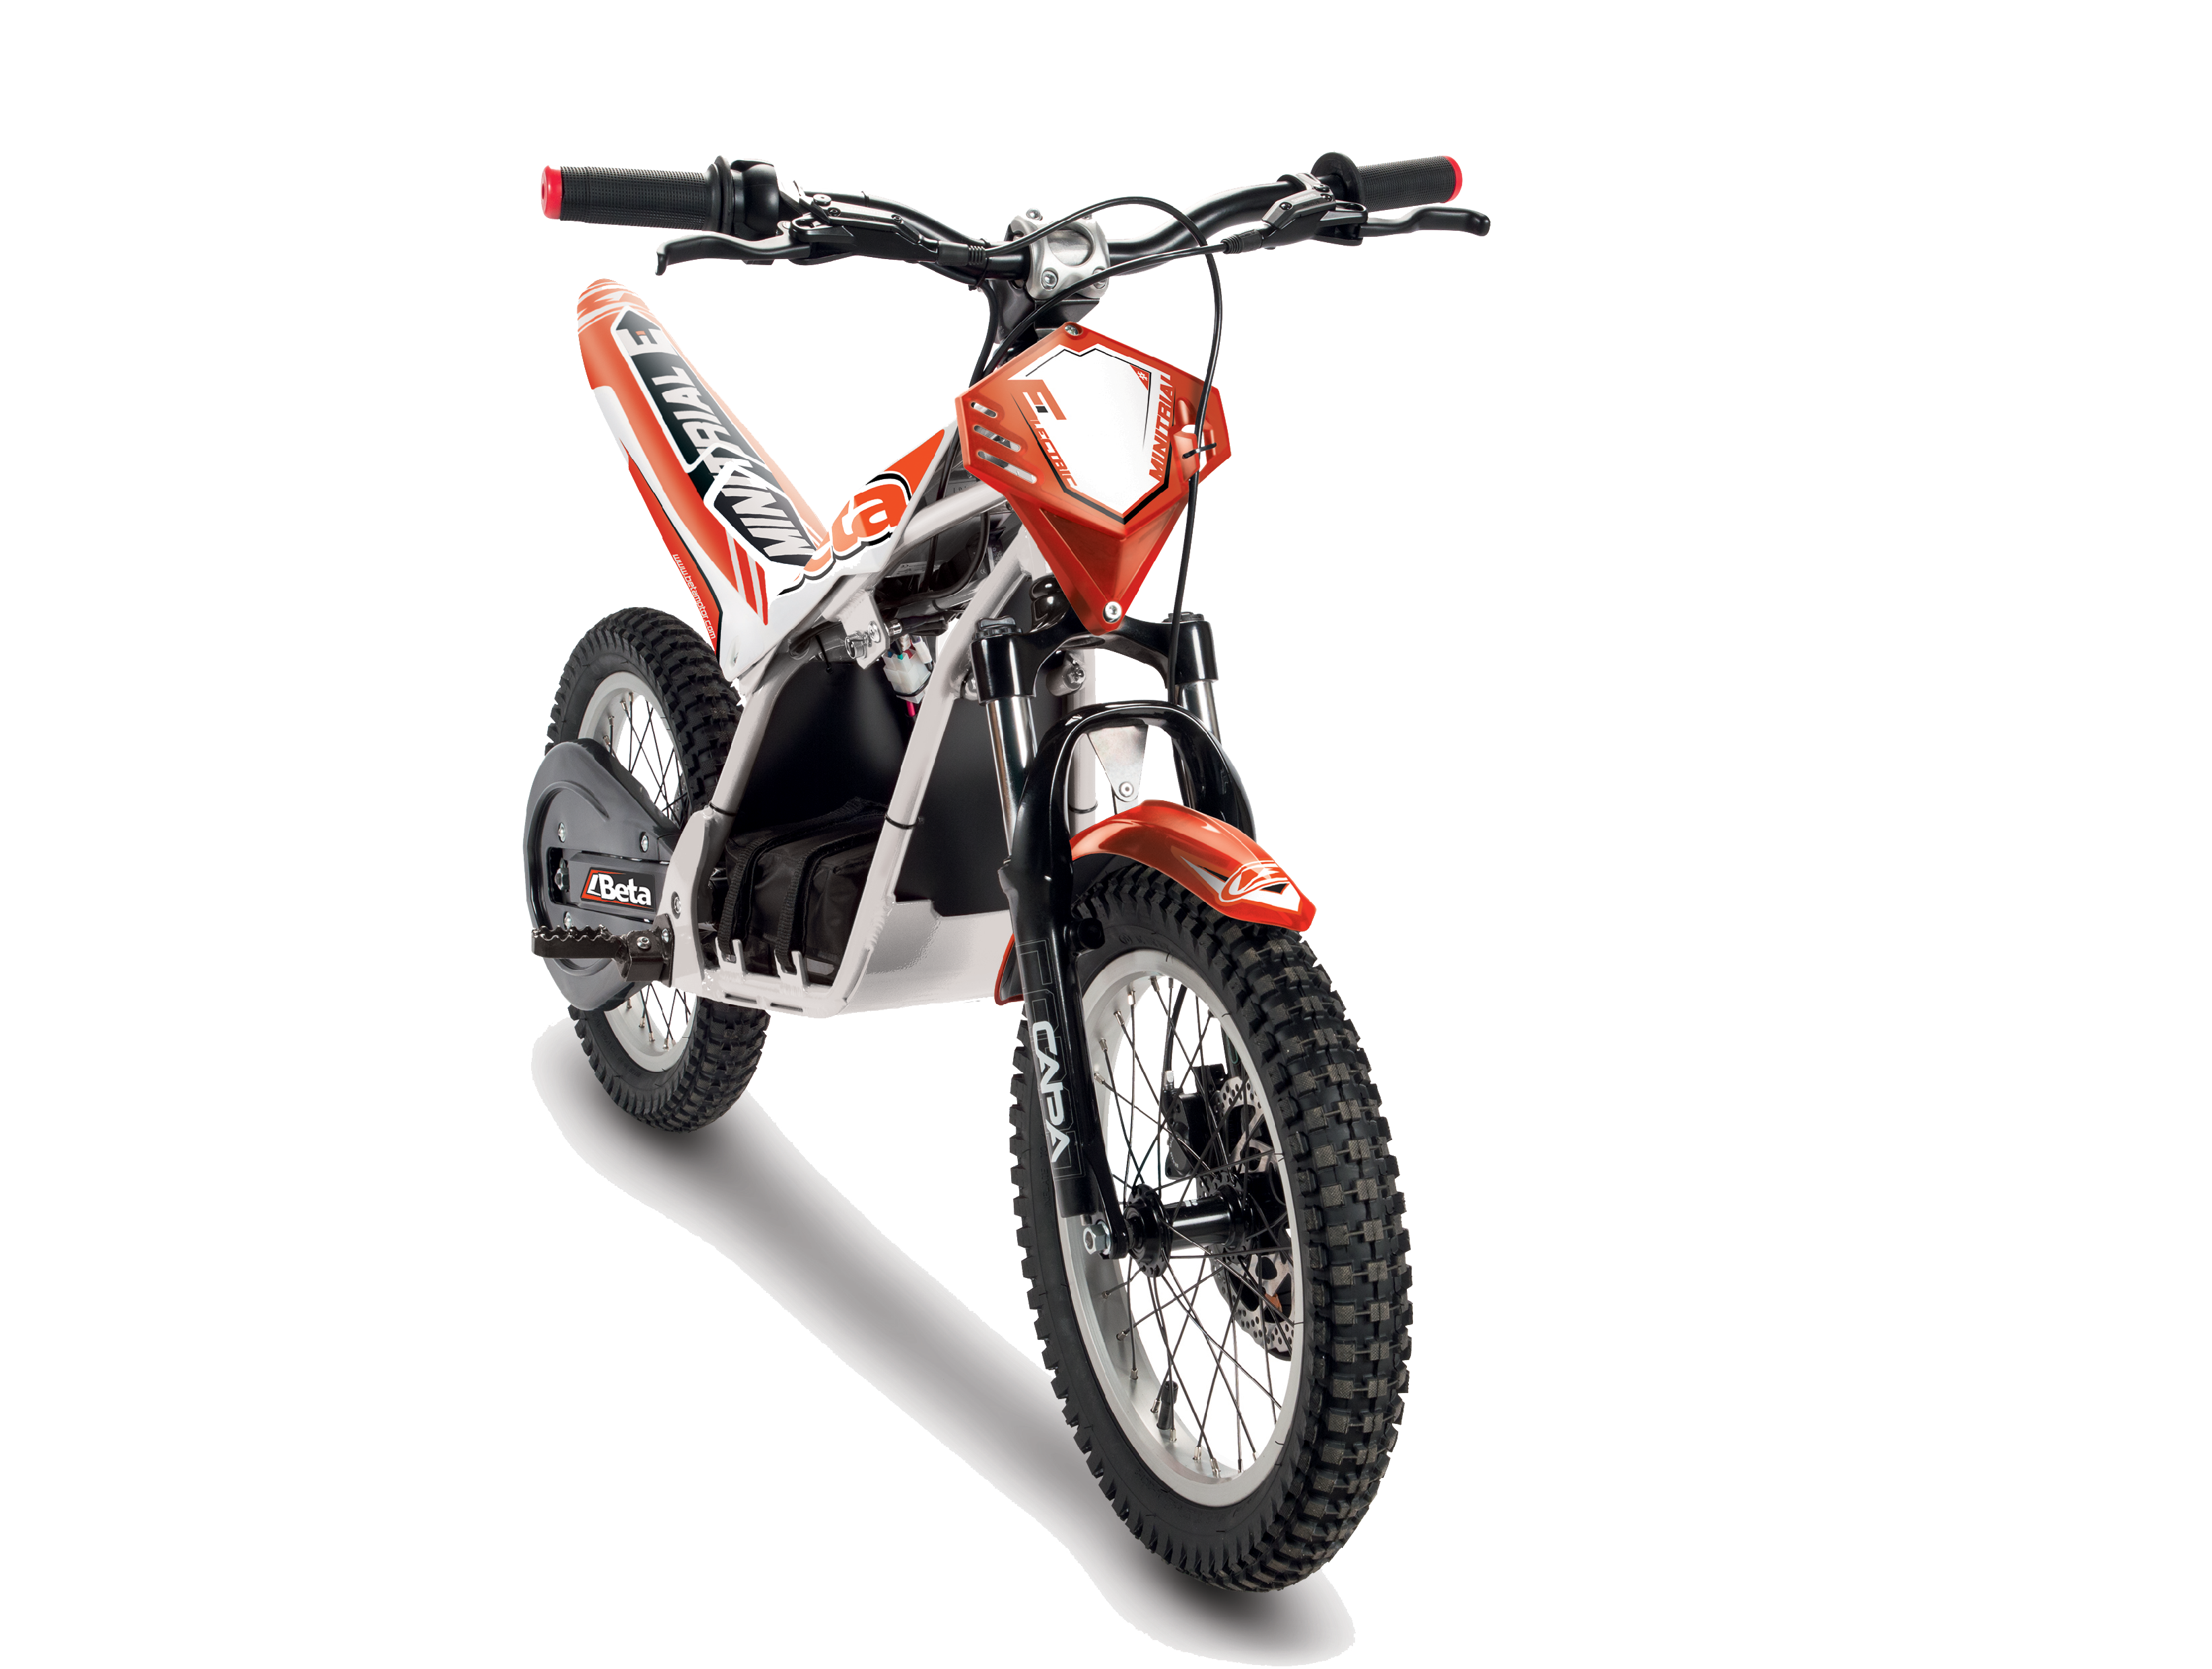 https://betamotorcycles.co.nz/wp-content/uploads/2020/11/MinitrialElectric16.png